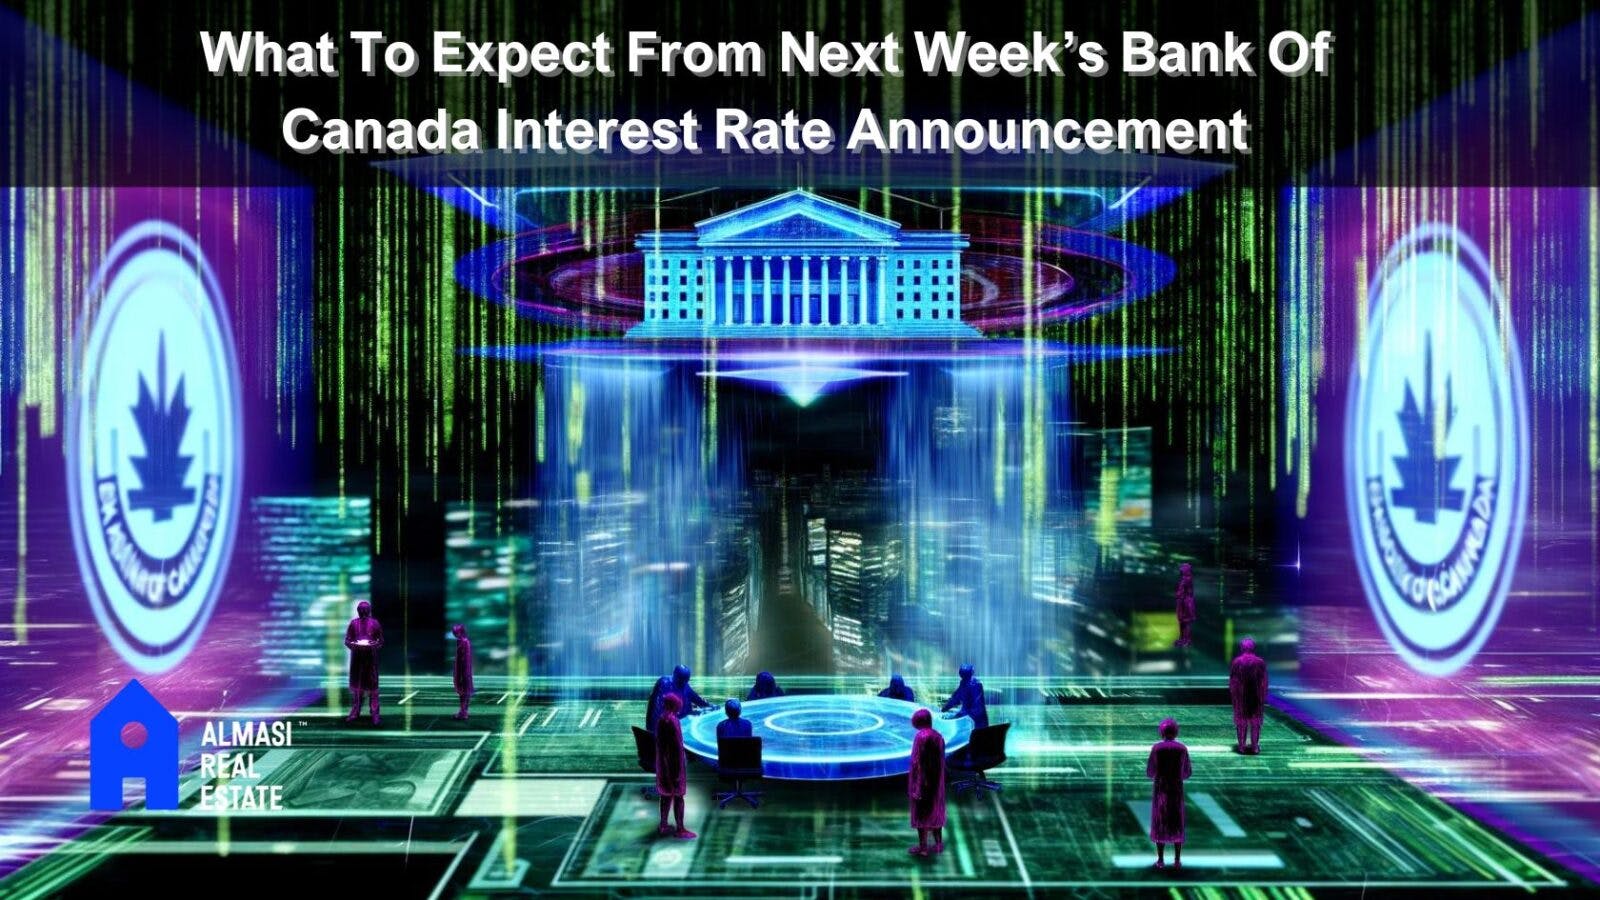 What To Expect From Next Week’s Bank Of Canada Interest Rate Announcement